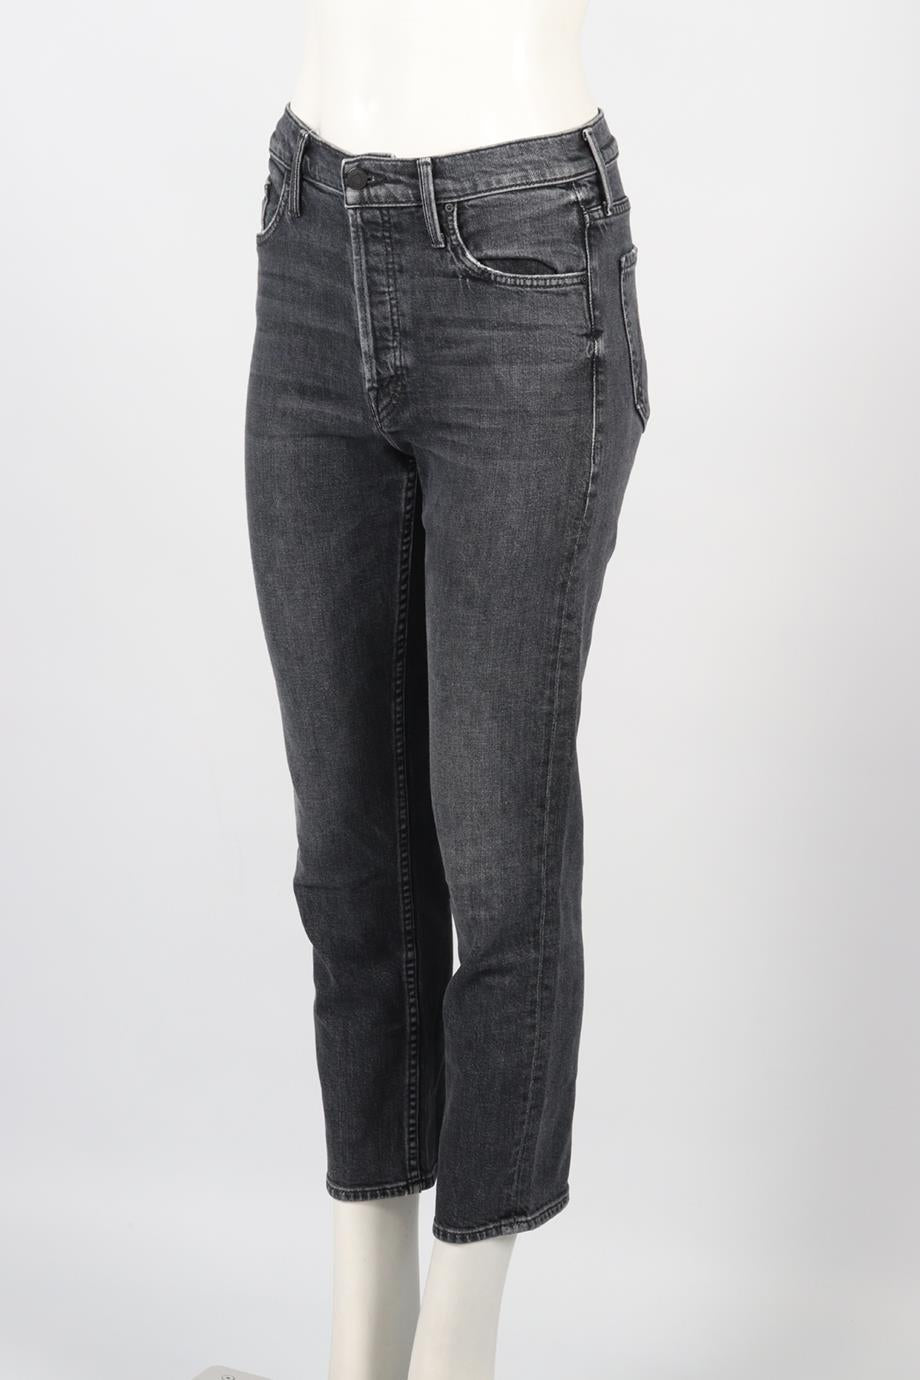 MOTHER HIGH RISE STRAIGHT LEG JEANS W27 UK 8-10